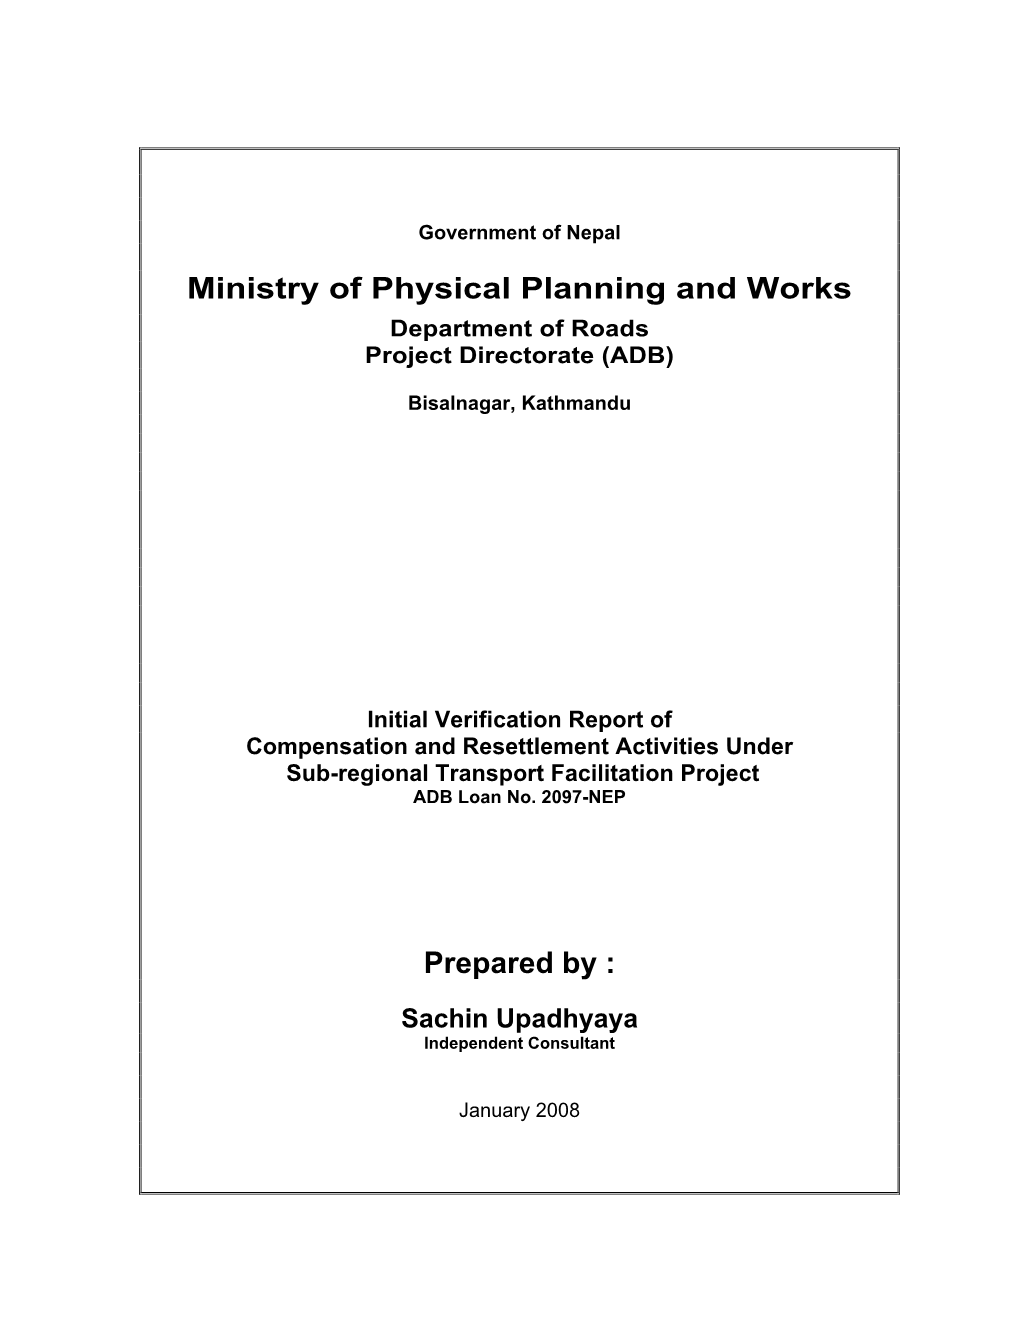 Ministry of Physical Planning and Works Prepared by